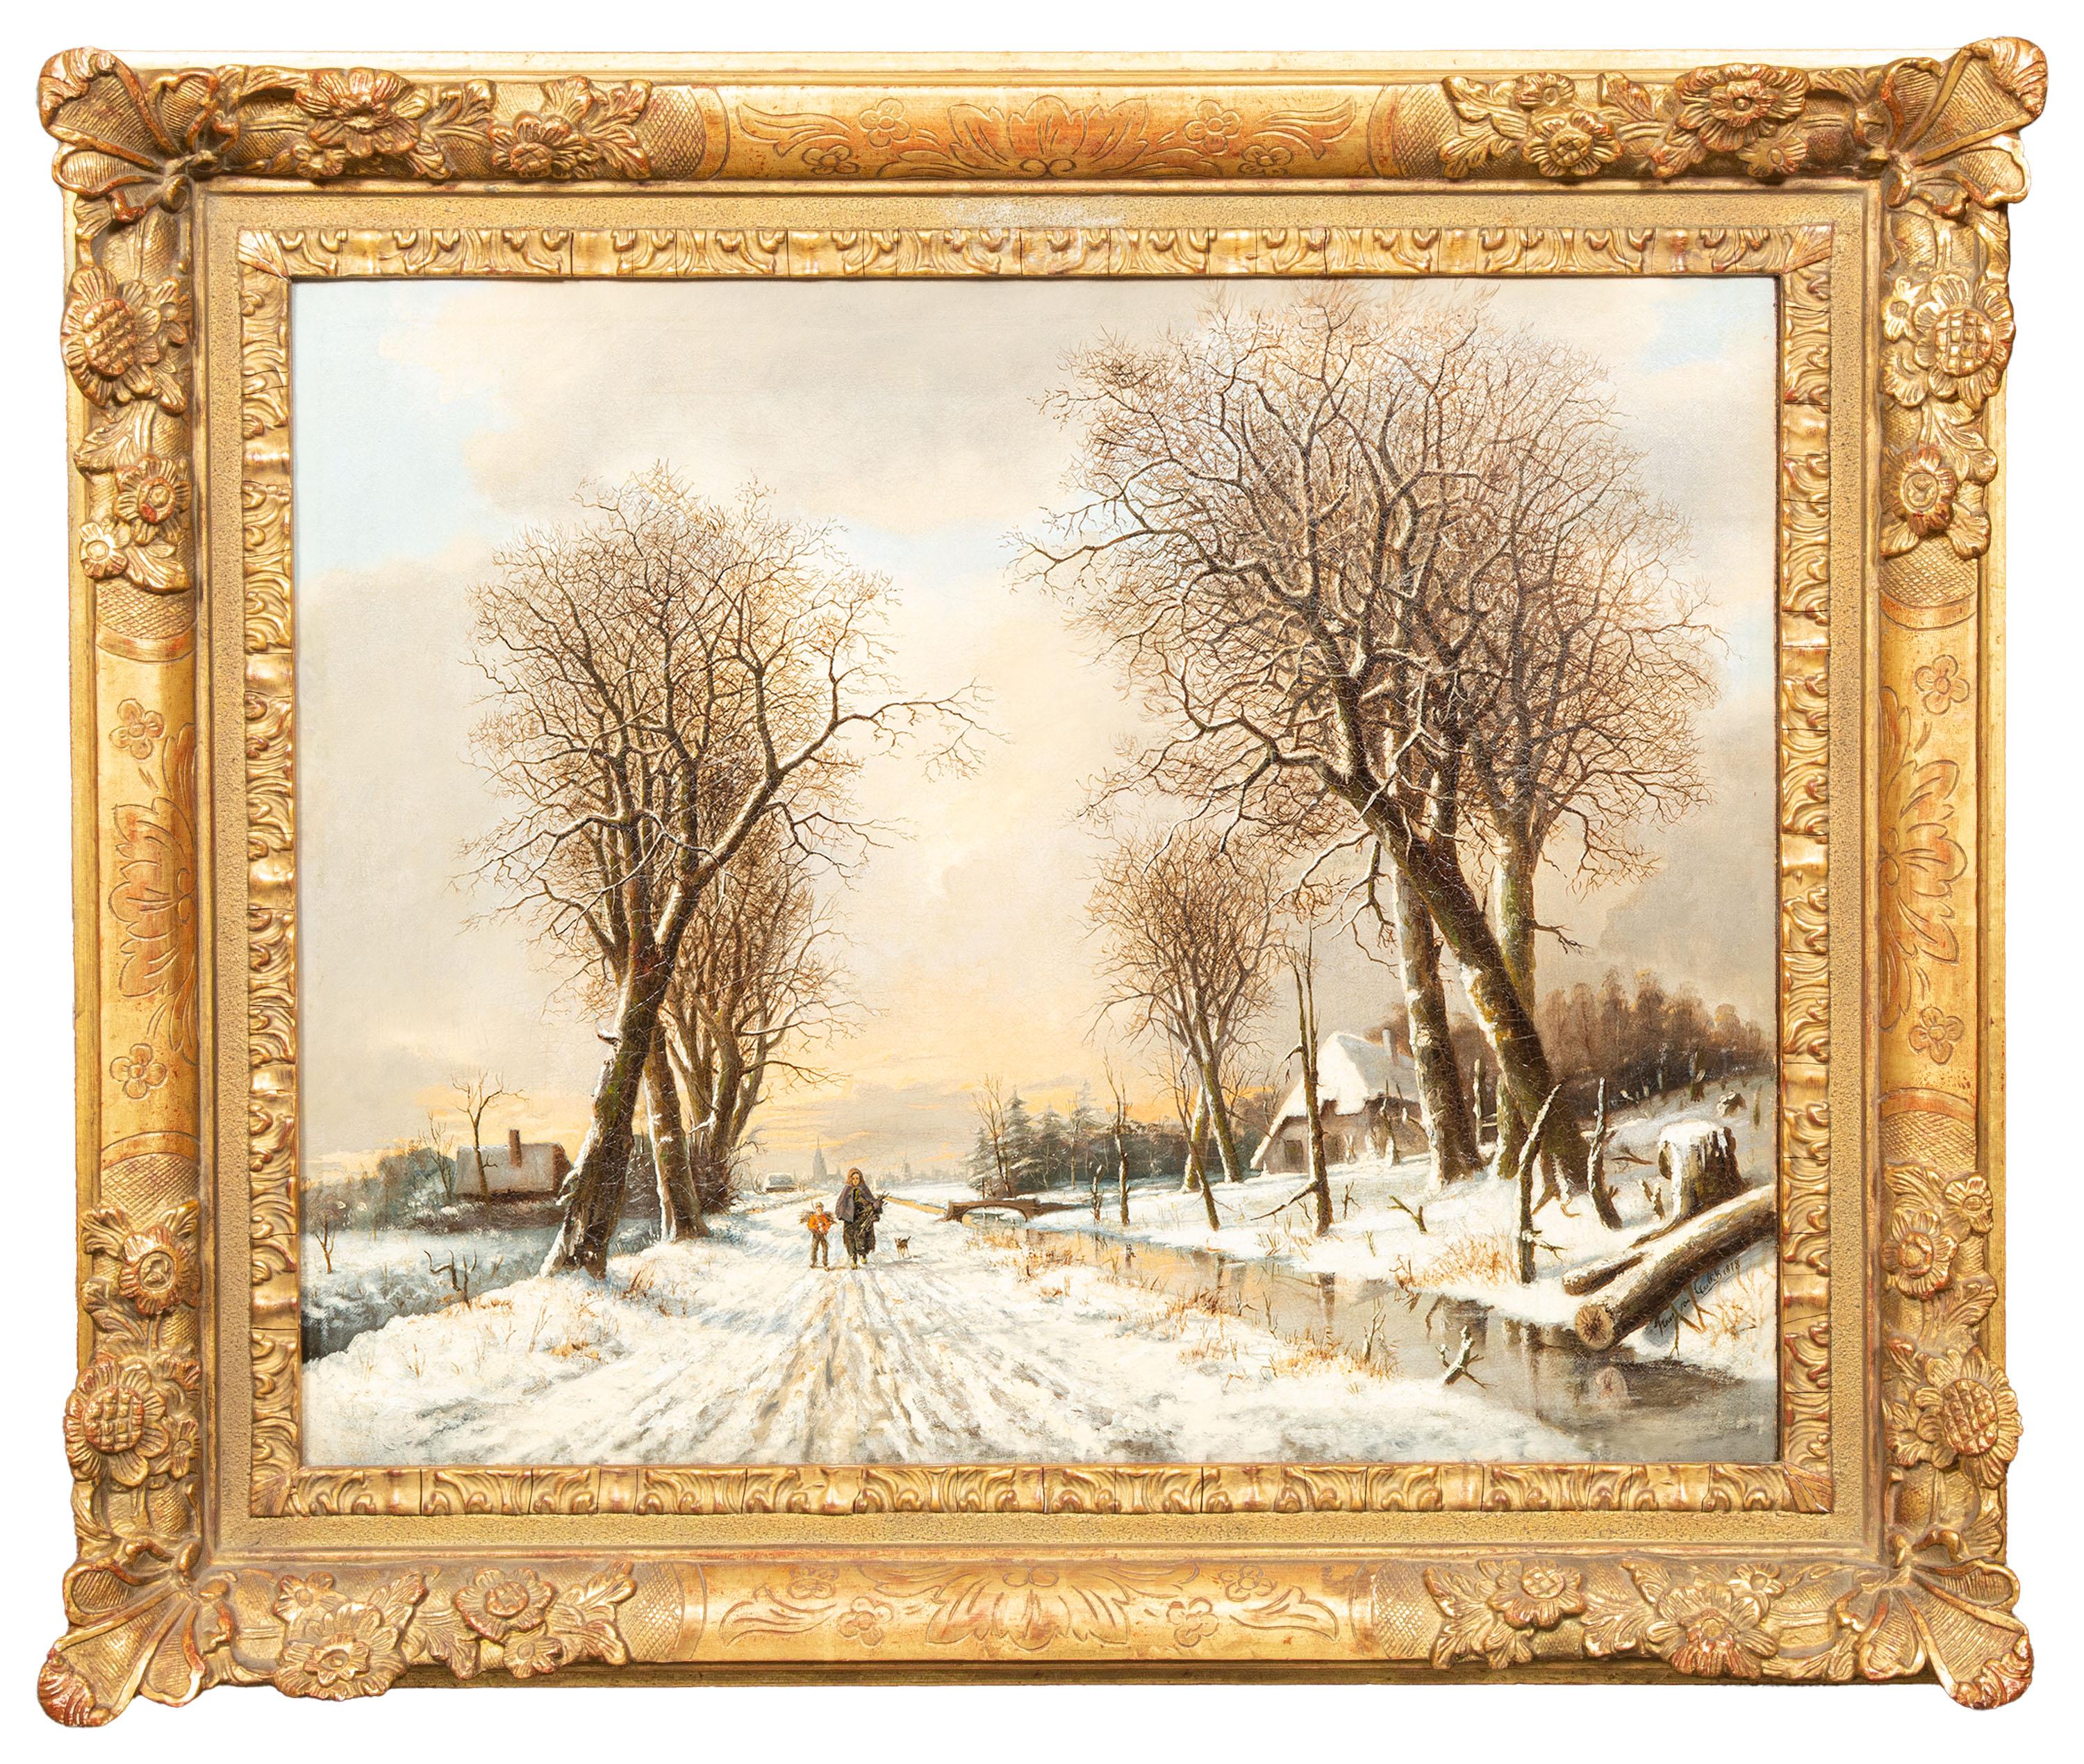 Franciscus Lodewijk Van Gulik
Maastricht 1841 - 1899 Rotterdam
Dutch Painter

'A Walk along the Snowy Landscape’

Signature: signed lower right and dated 'Frans van Gulik 1878'
Medium: oil on canvas
Dimensions: image size 50 x 62 cm, frame size 67,5